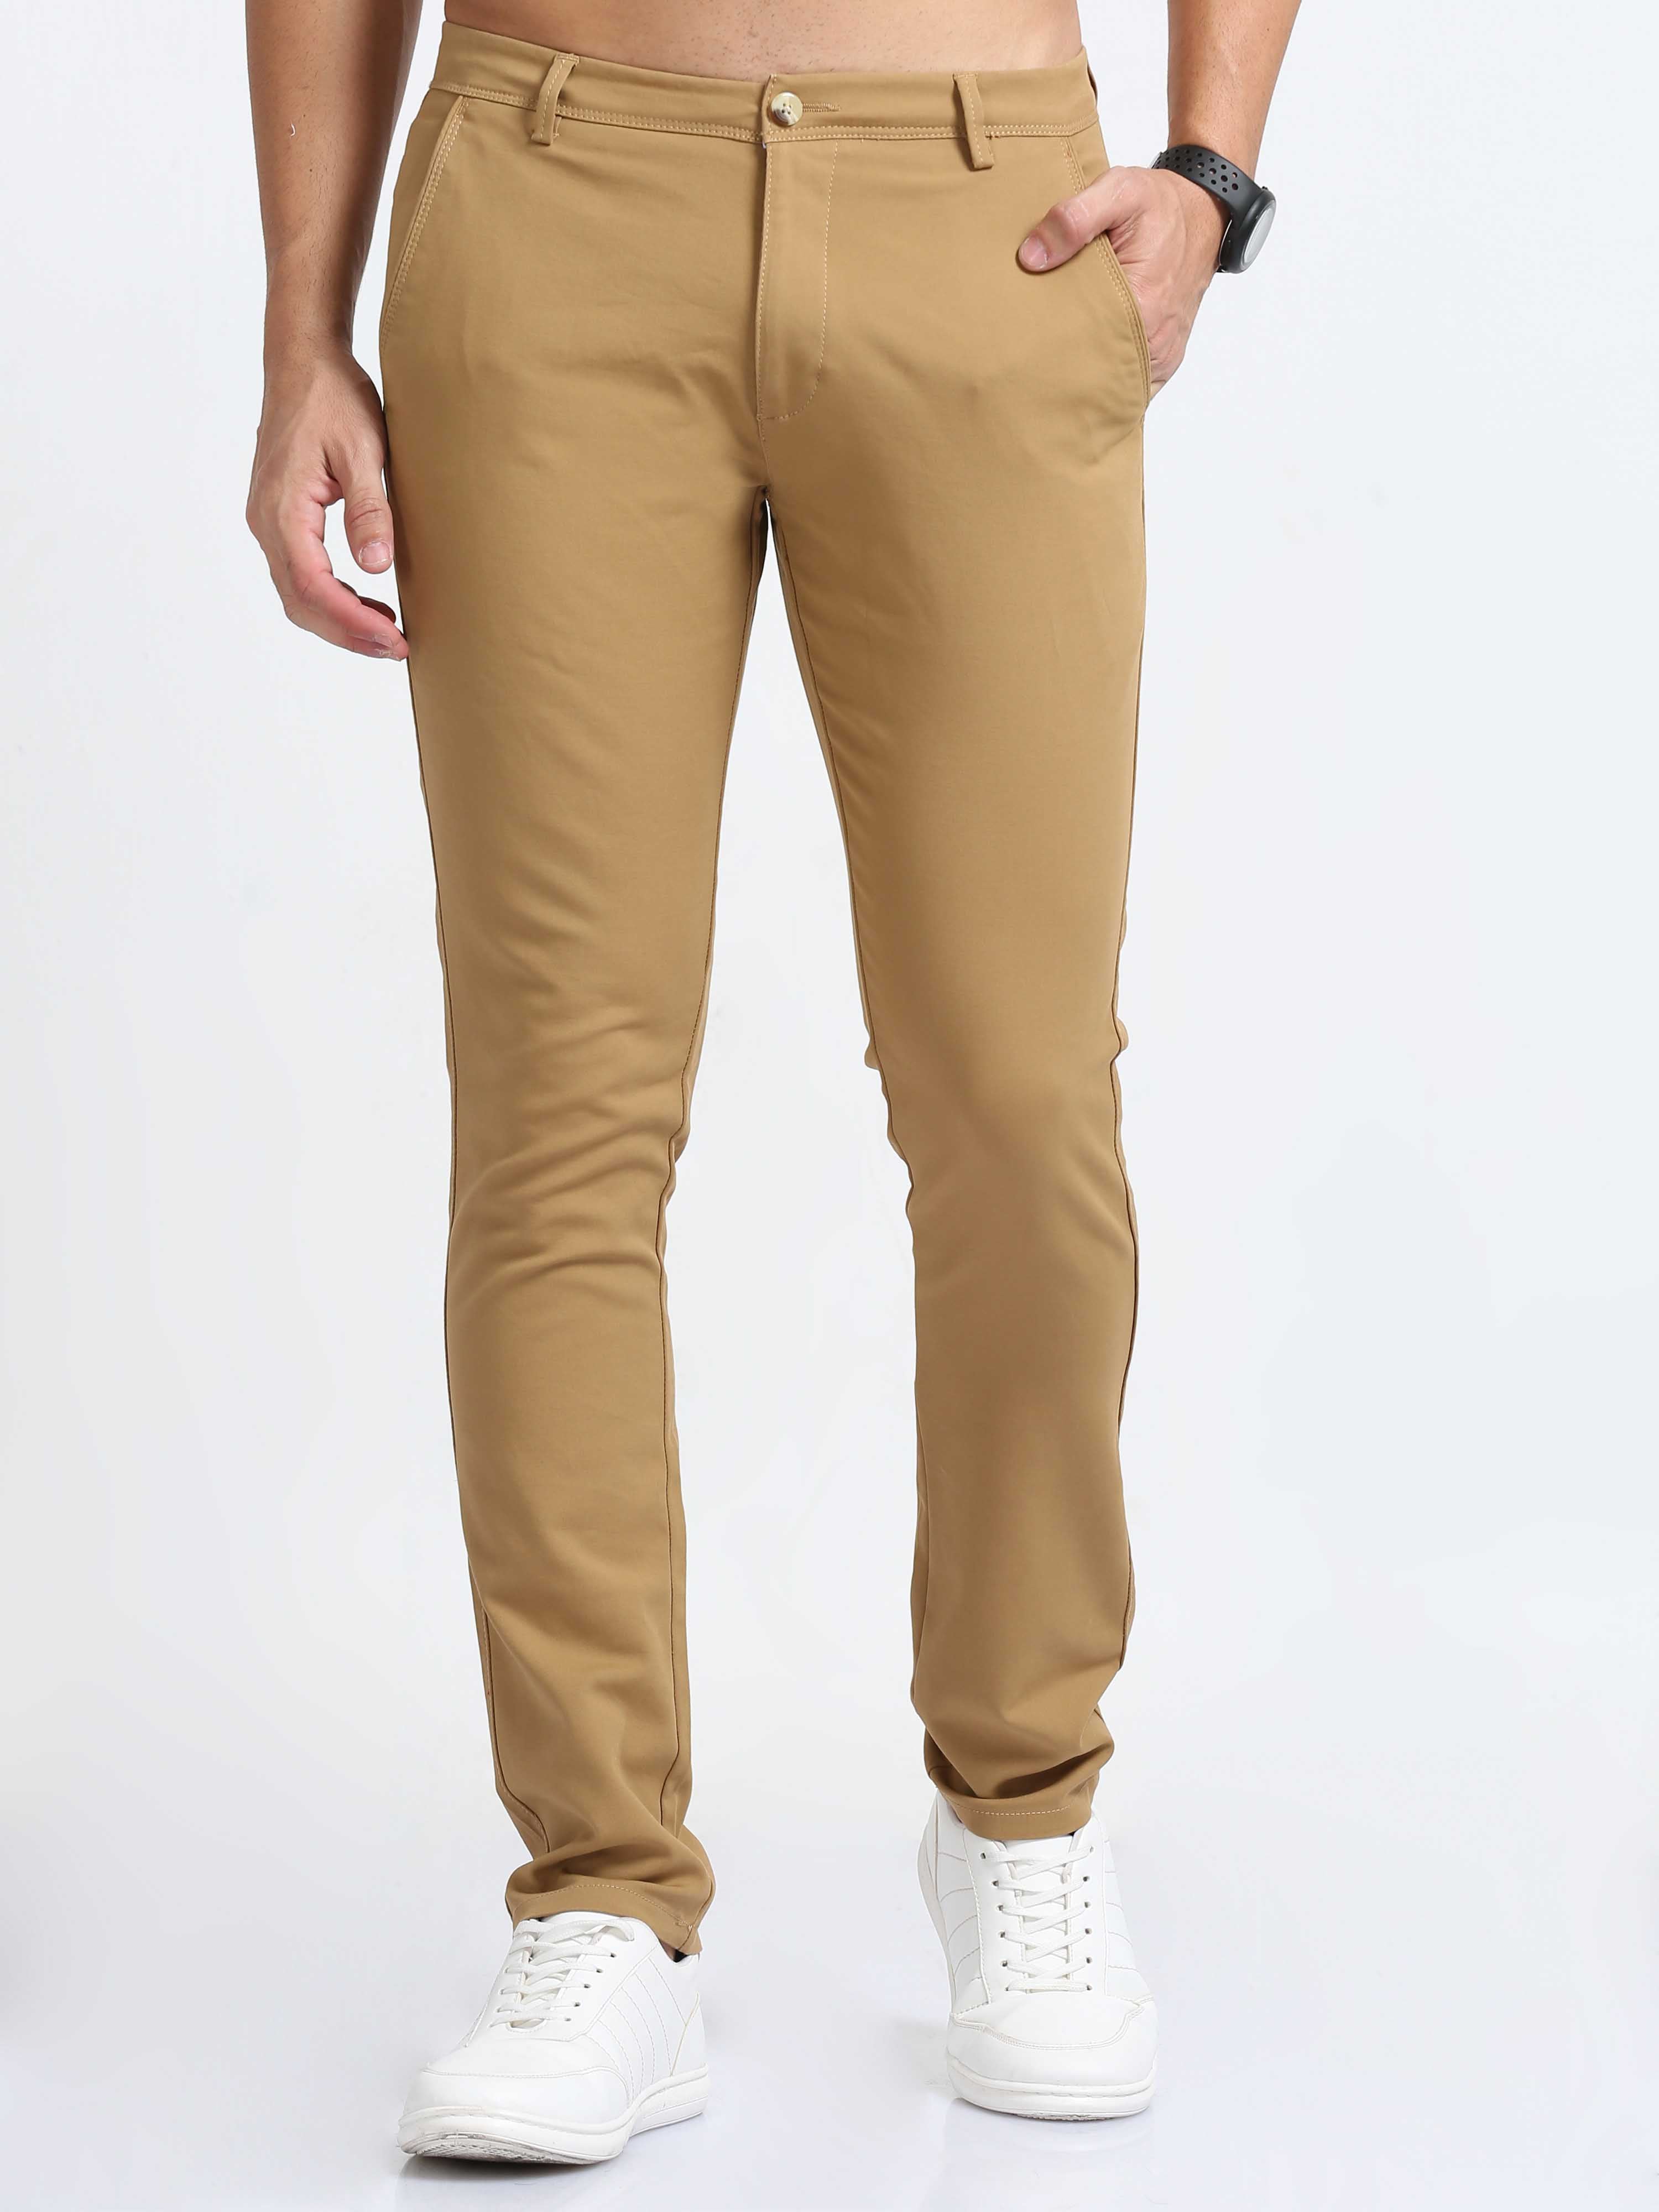 Buy Khaki Trousers & Pants for Men by MUFTI Online | Ajio.com